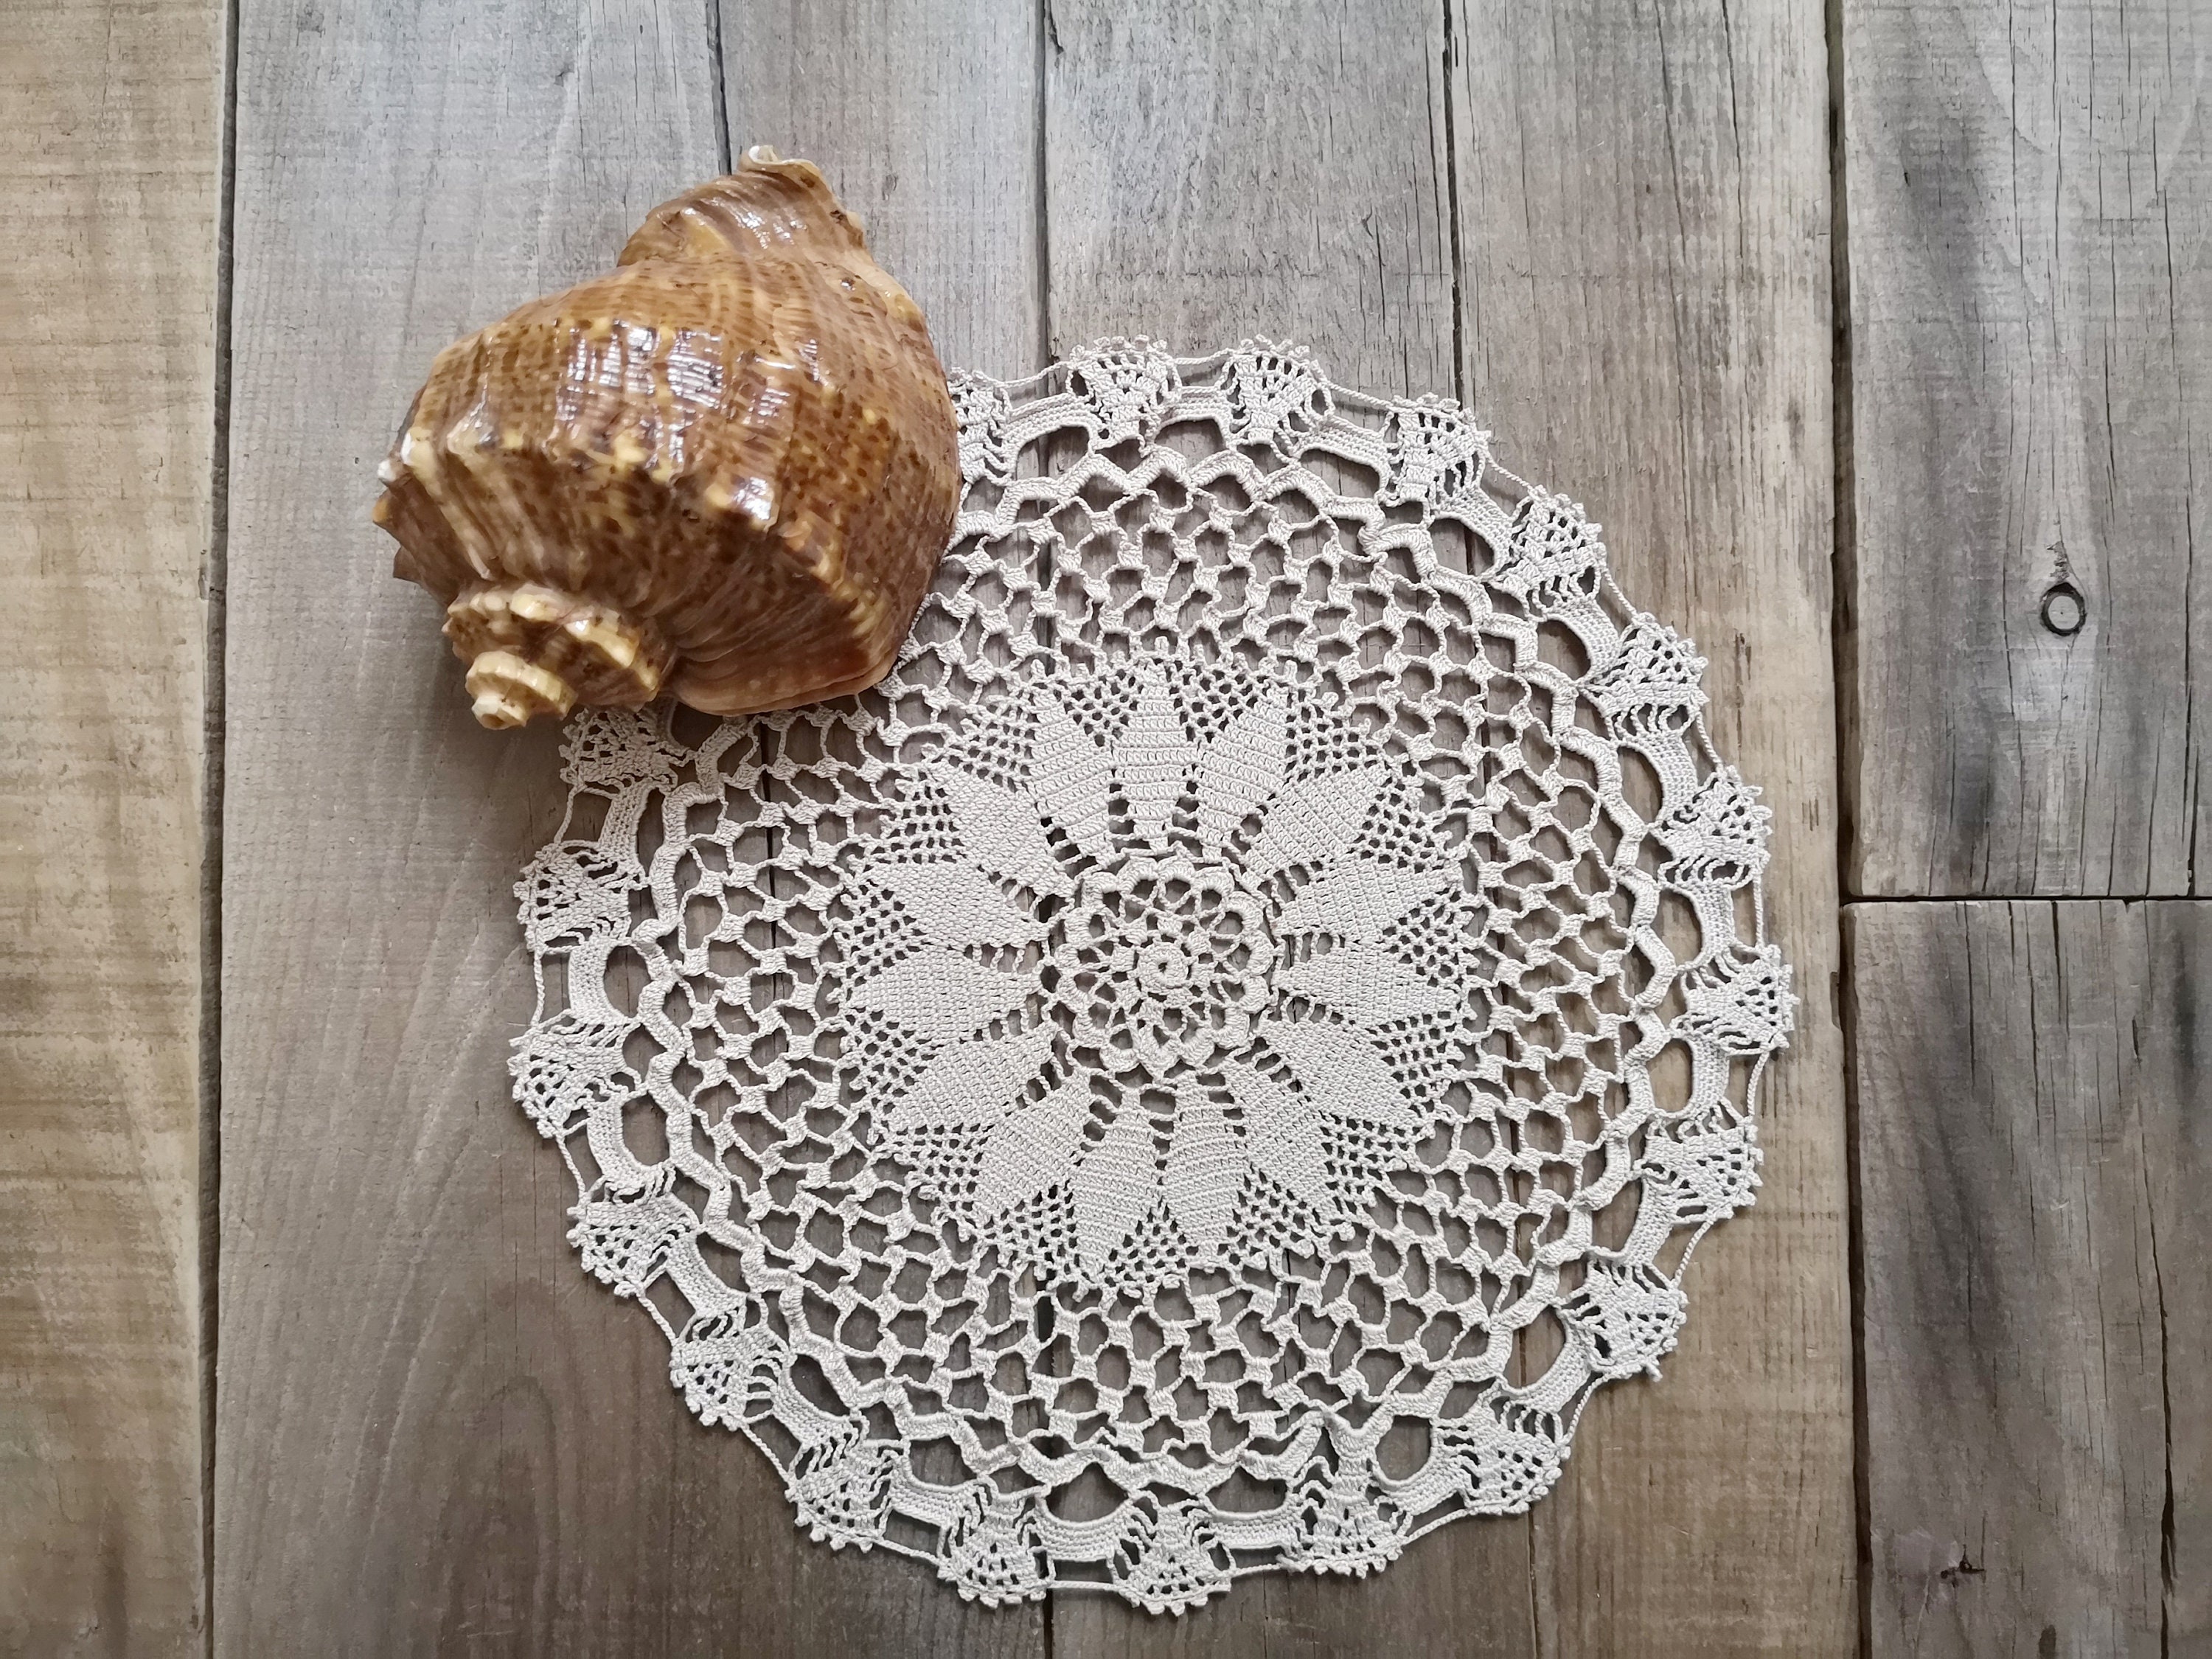 500 Lace Paper Doilies 4 inch - Paper Doily - White Lace Paper Doily - Bulk  Paper Doily - Wholesale Paper Doily - Pretty Packaging